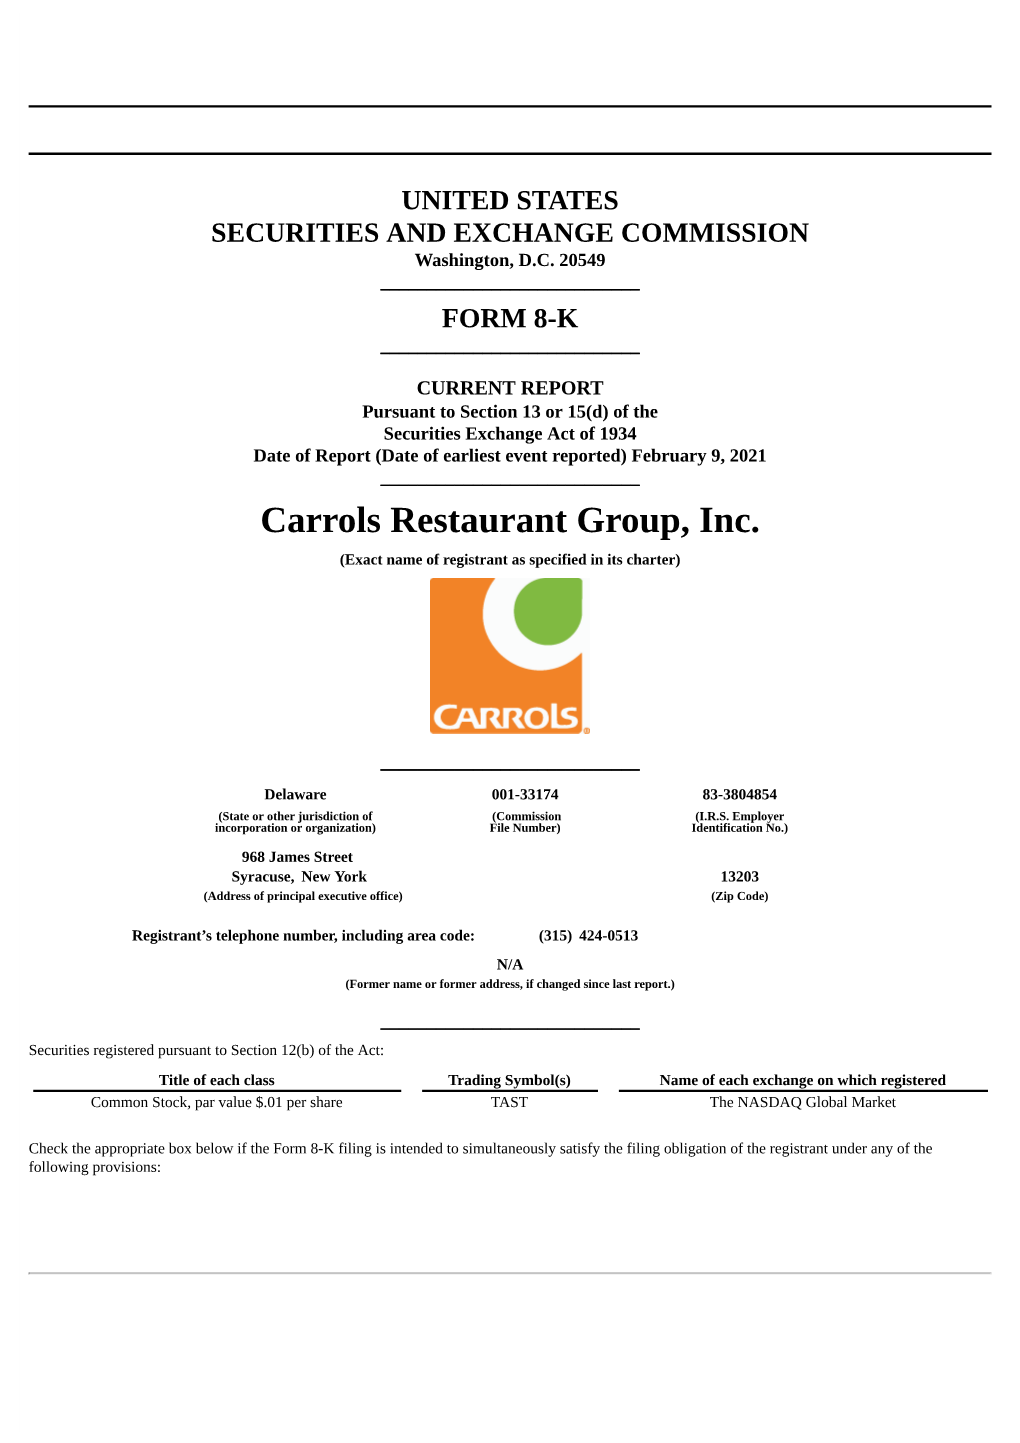 Carrols Restaurant Group, Inc. (Exact Name of Registrant As Specified in Its Charter)